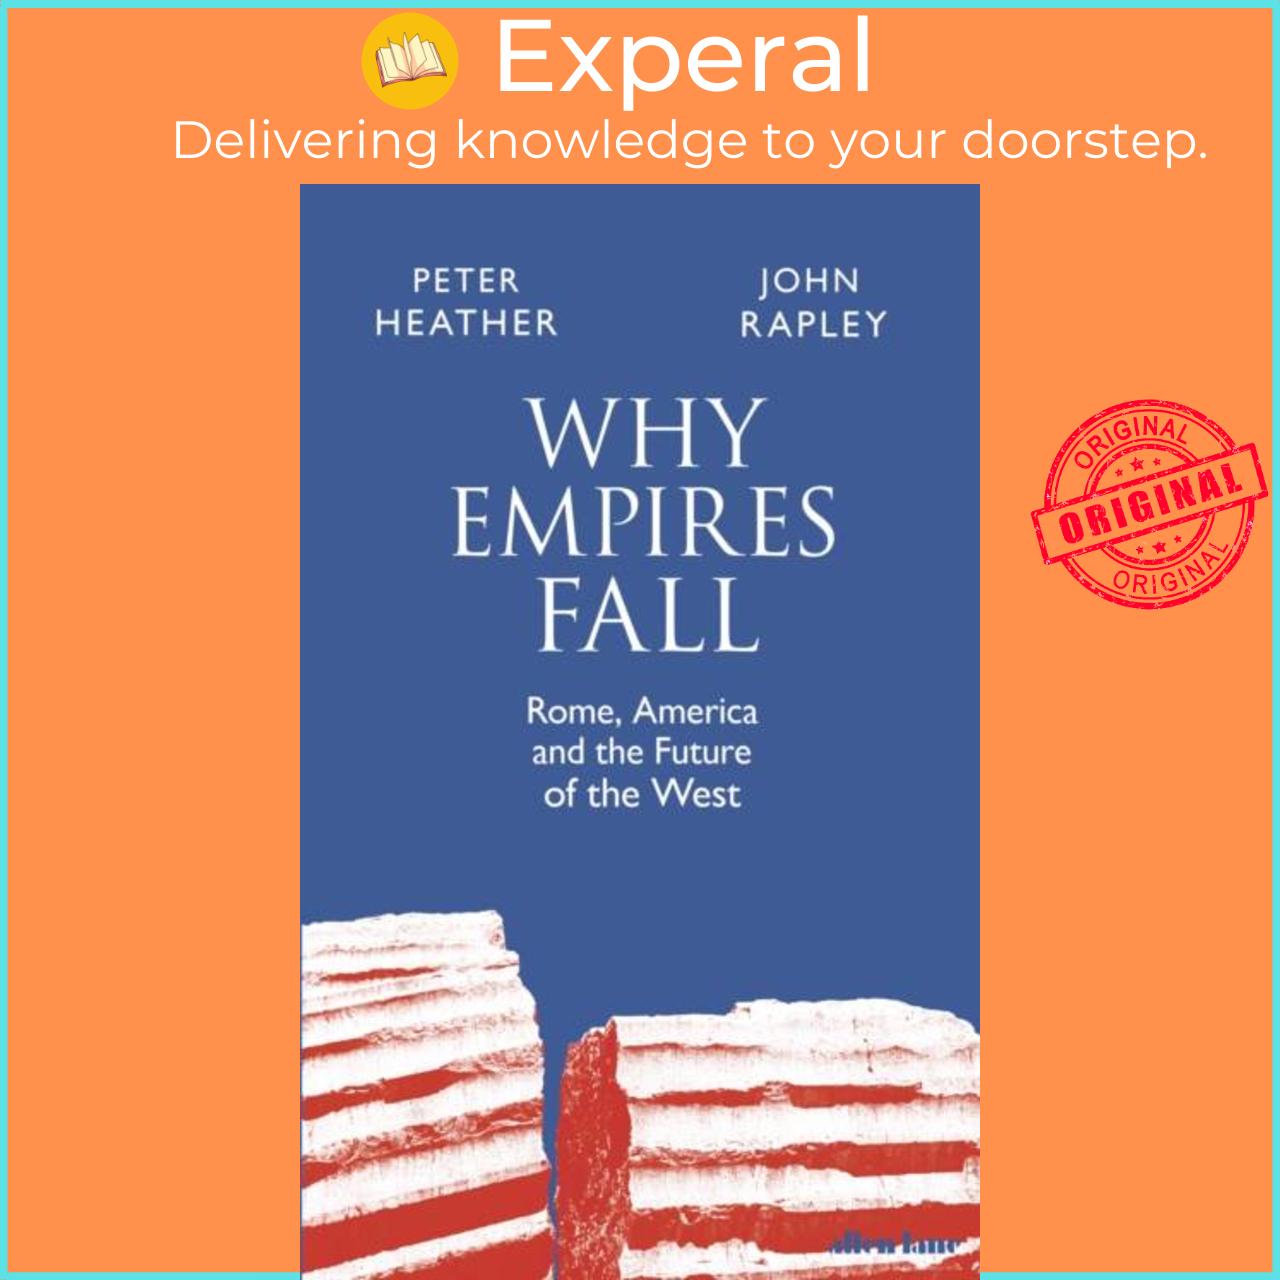 Sách - Why Empires Fall - Rome, America and the Future of the West by Peter Heather (UK edition, hardcover)